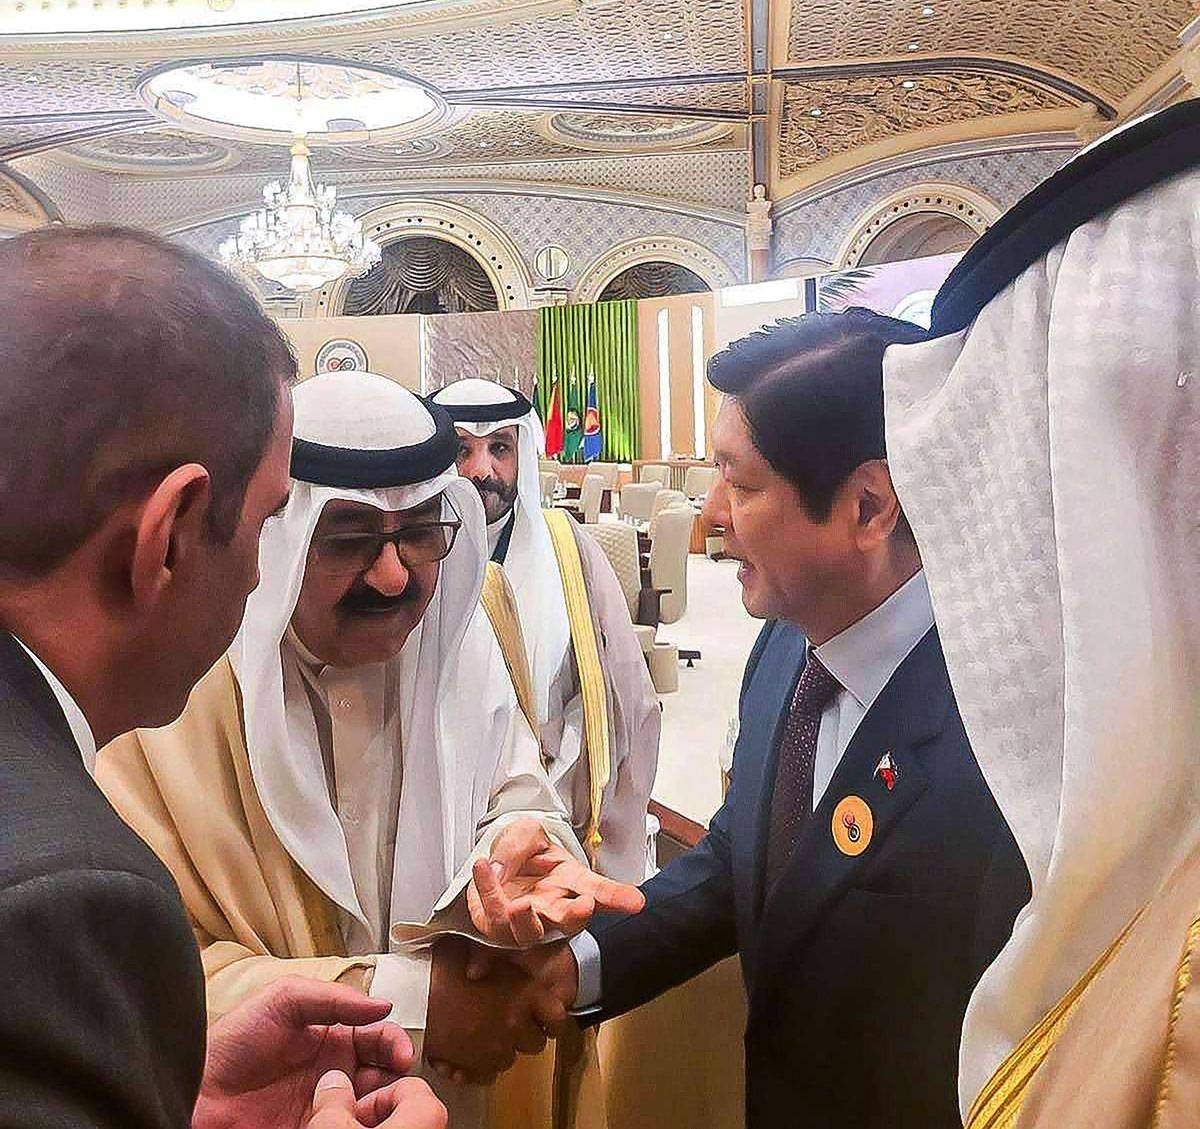 THE PRINCE AND THE PRESIDENT The Crown Prince of Kuwait, Sheikh Mishal Al-Ahmad Al-Jaber Al-Sabah (center), meets President Ferdinand Marcos Jr. at the sidelines of the 1st Asean-Gulf Cooperation Council (GCC) Summit in Riyadh, Kingdom of Saudi Arabia (KSA), on Friday, Oct. 20, 2023, to discuss labor relations between the two countries. PHOTO BY PRESIDENTIAL COMMUNICATIONS OFFICE